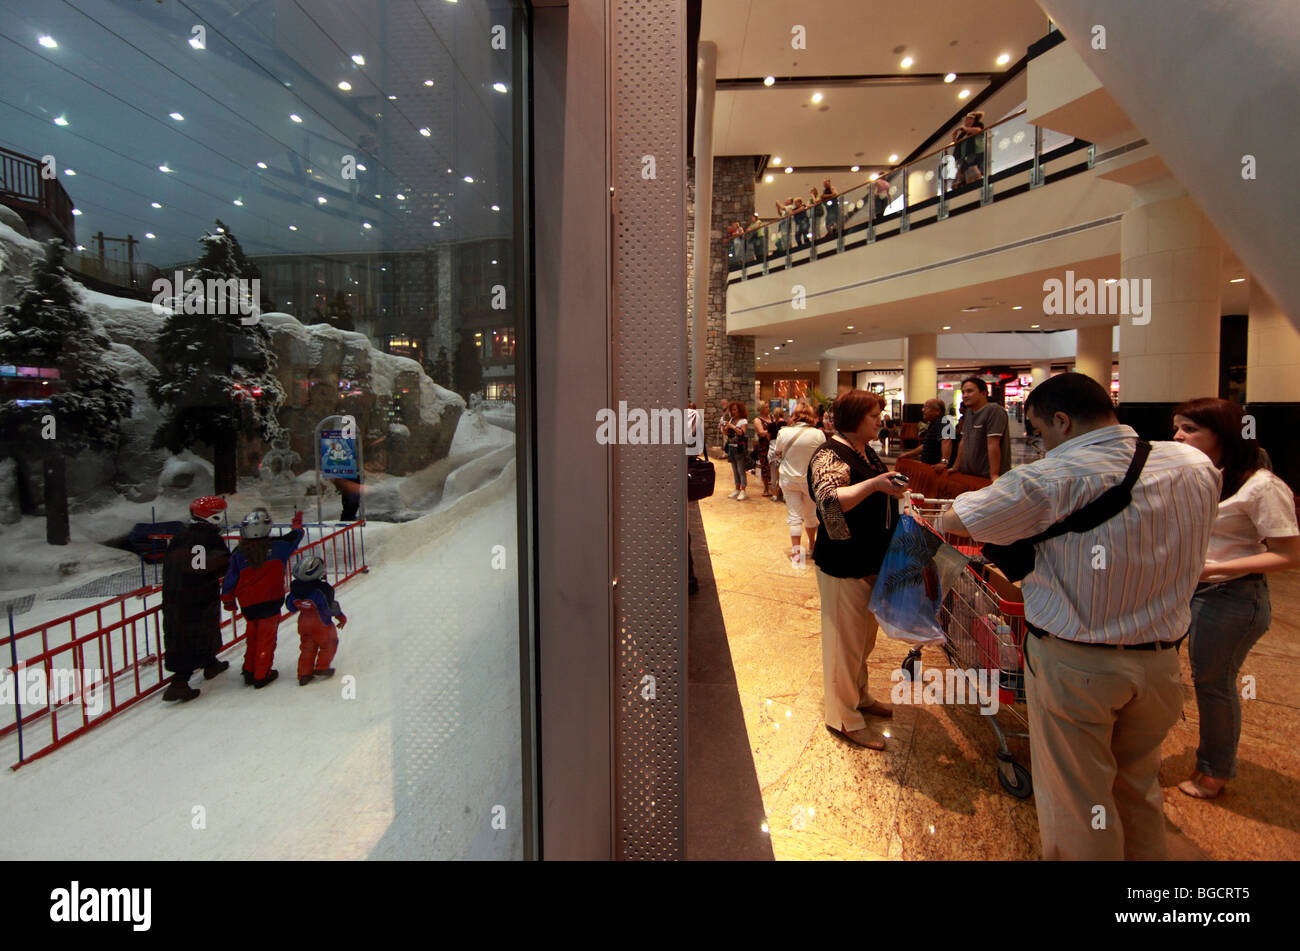 People in the indoor ski hall in the Mall of Dubai, United Arab Emirates Stock Photo